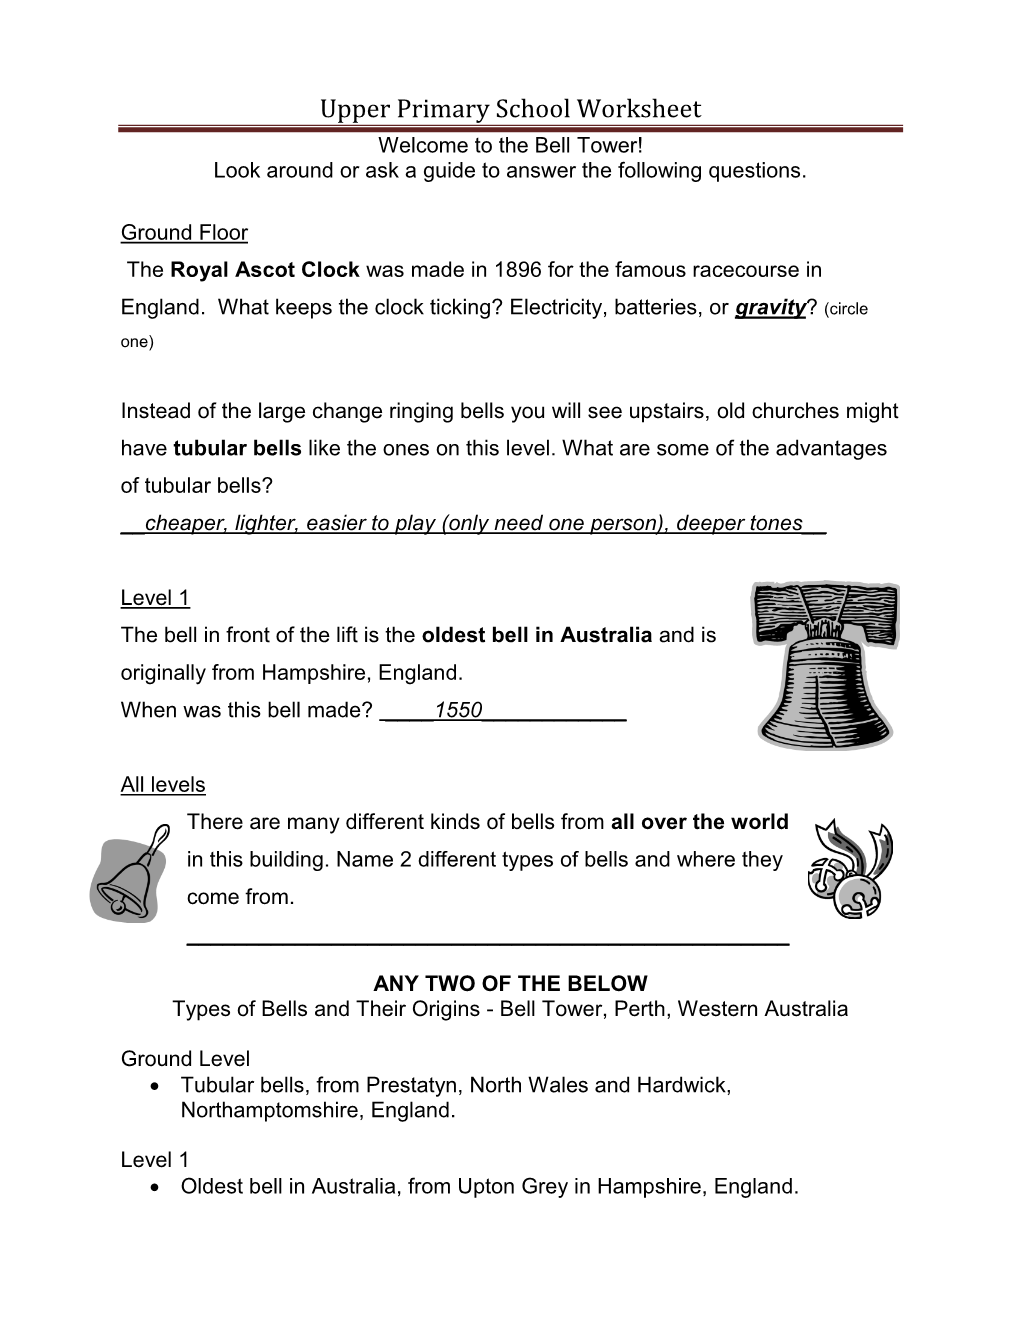 Upper Primary School Worksheet Welcome to the Bell Tower! Look Around Or Ask a Guide to Answer the Following Questions